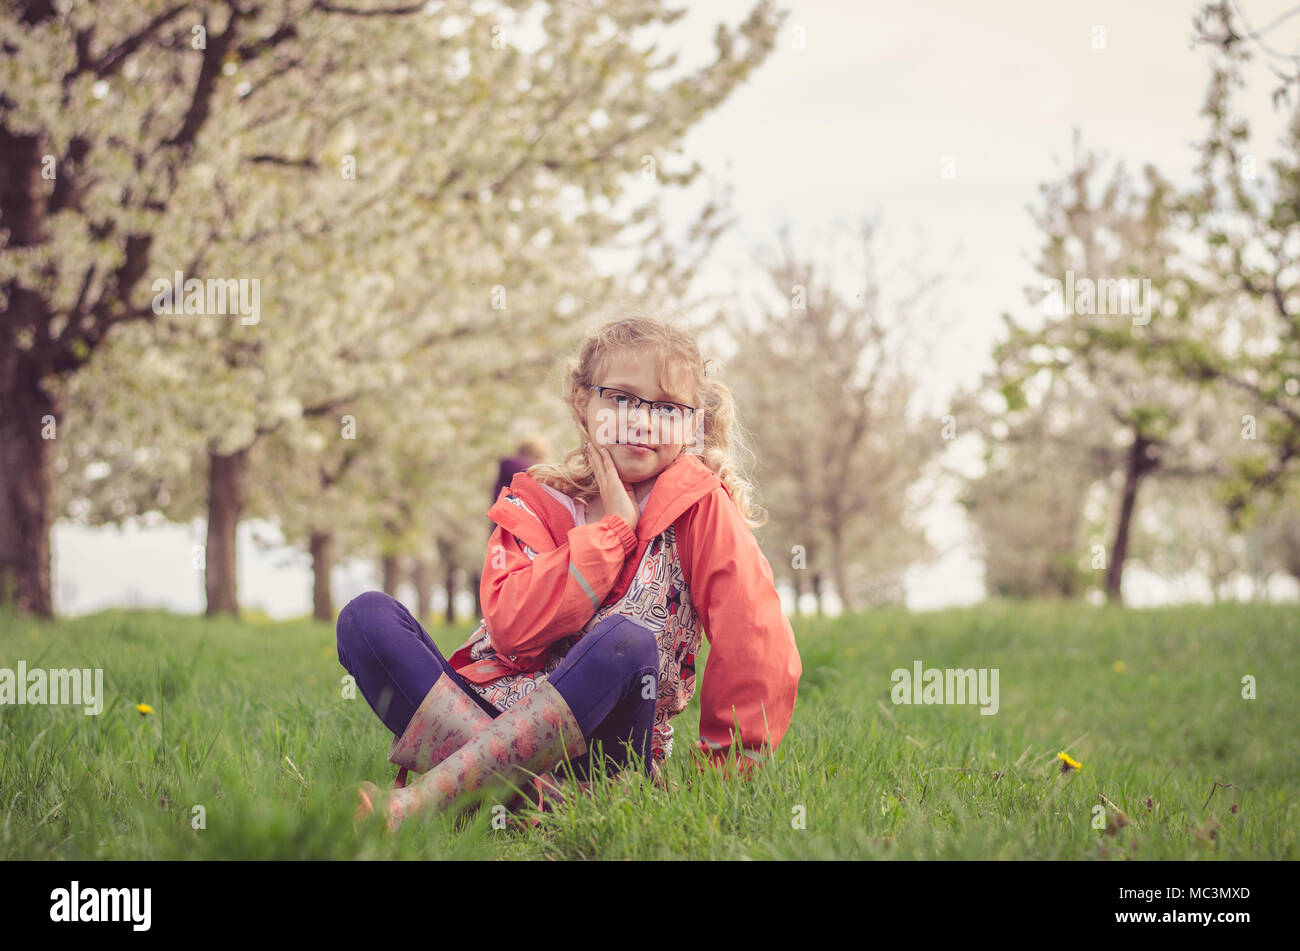 adorable blond girl sitting in green grass under trees with blossoming white flowers in spring season Stock Photo